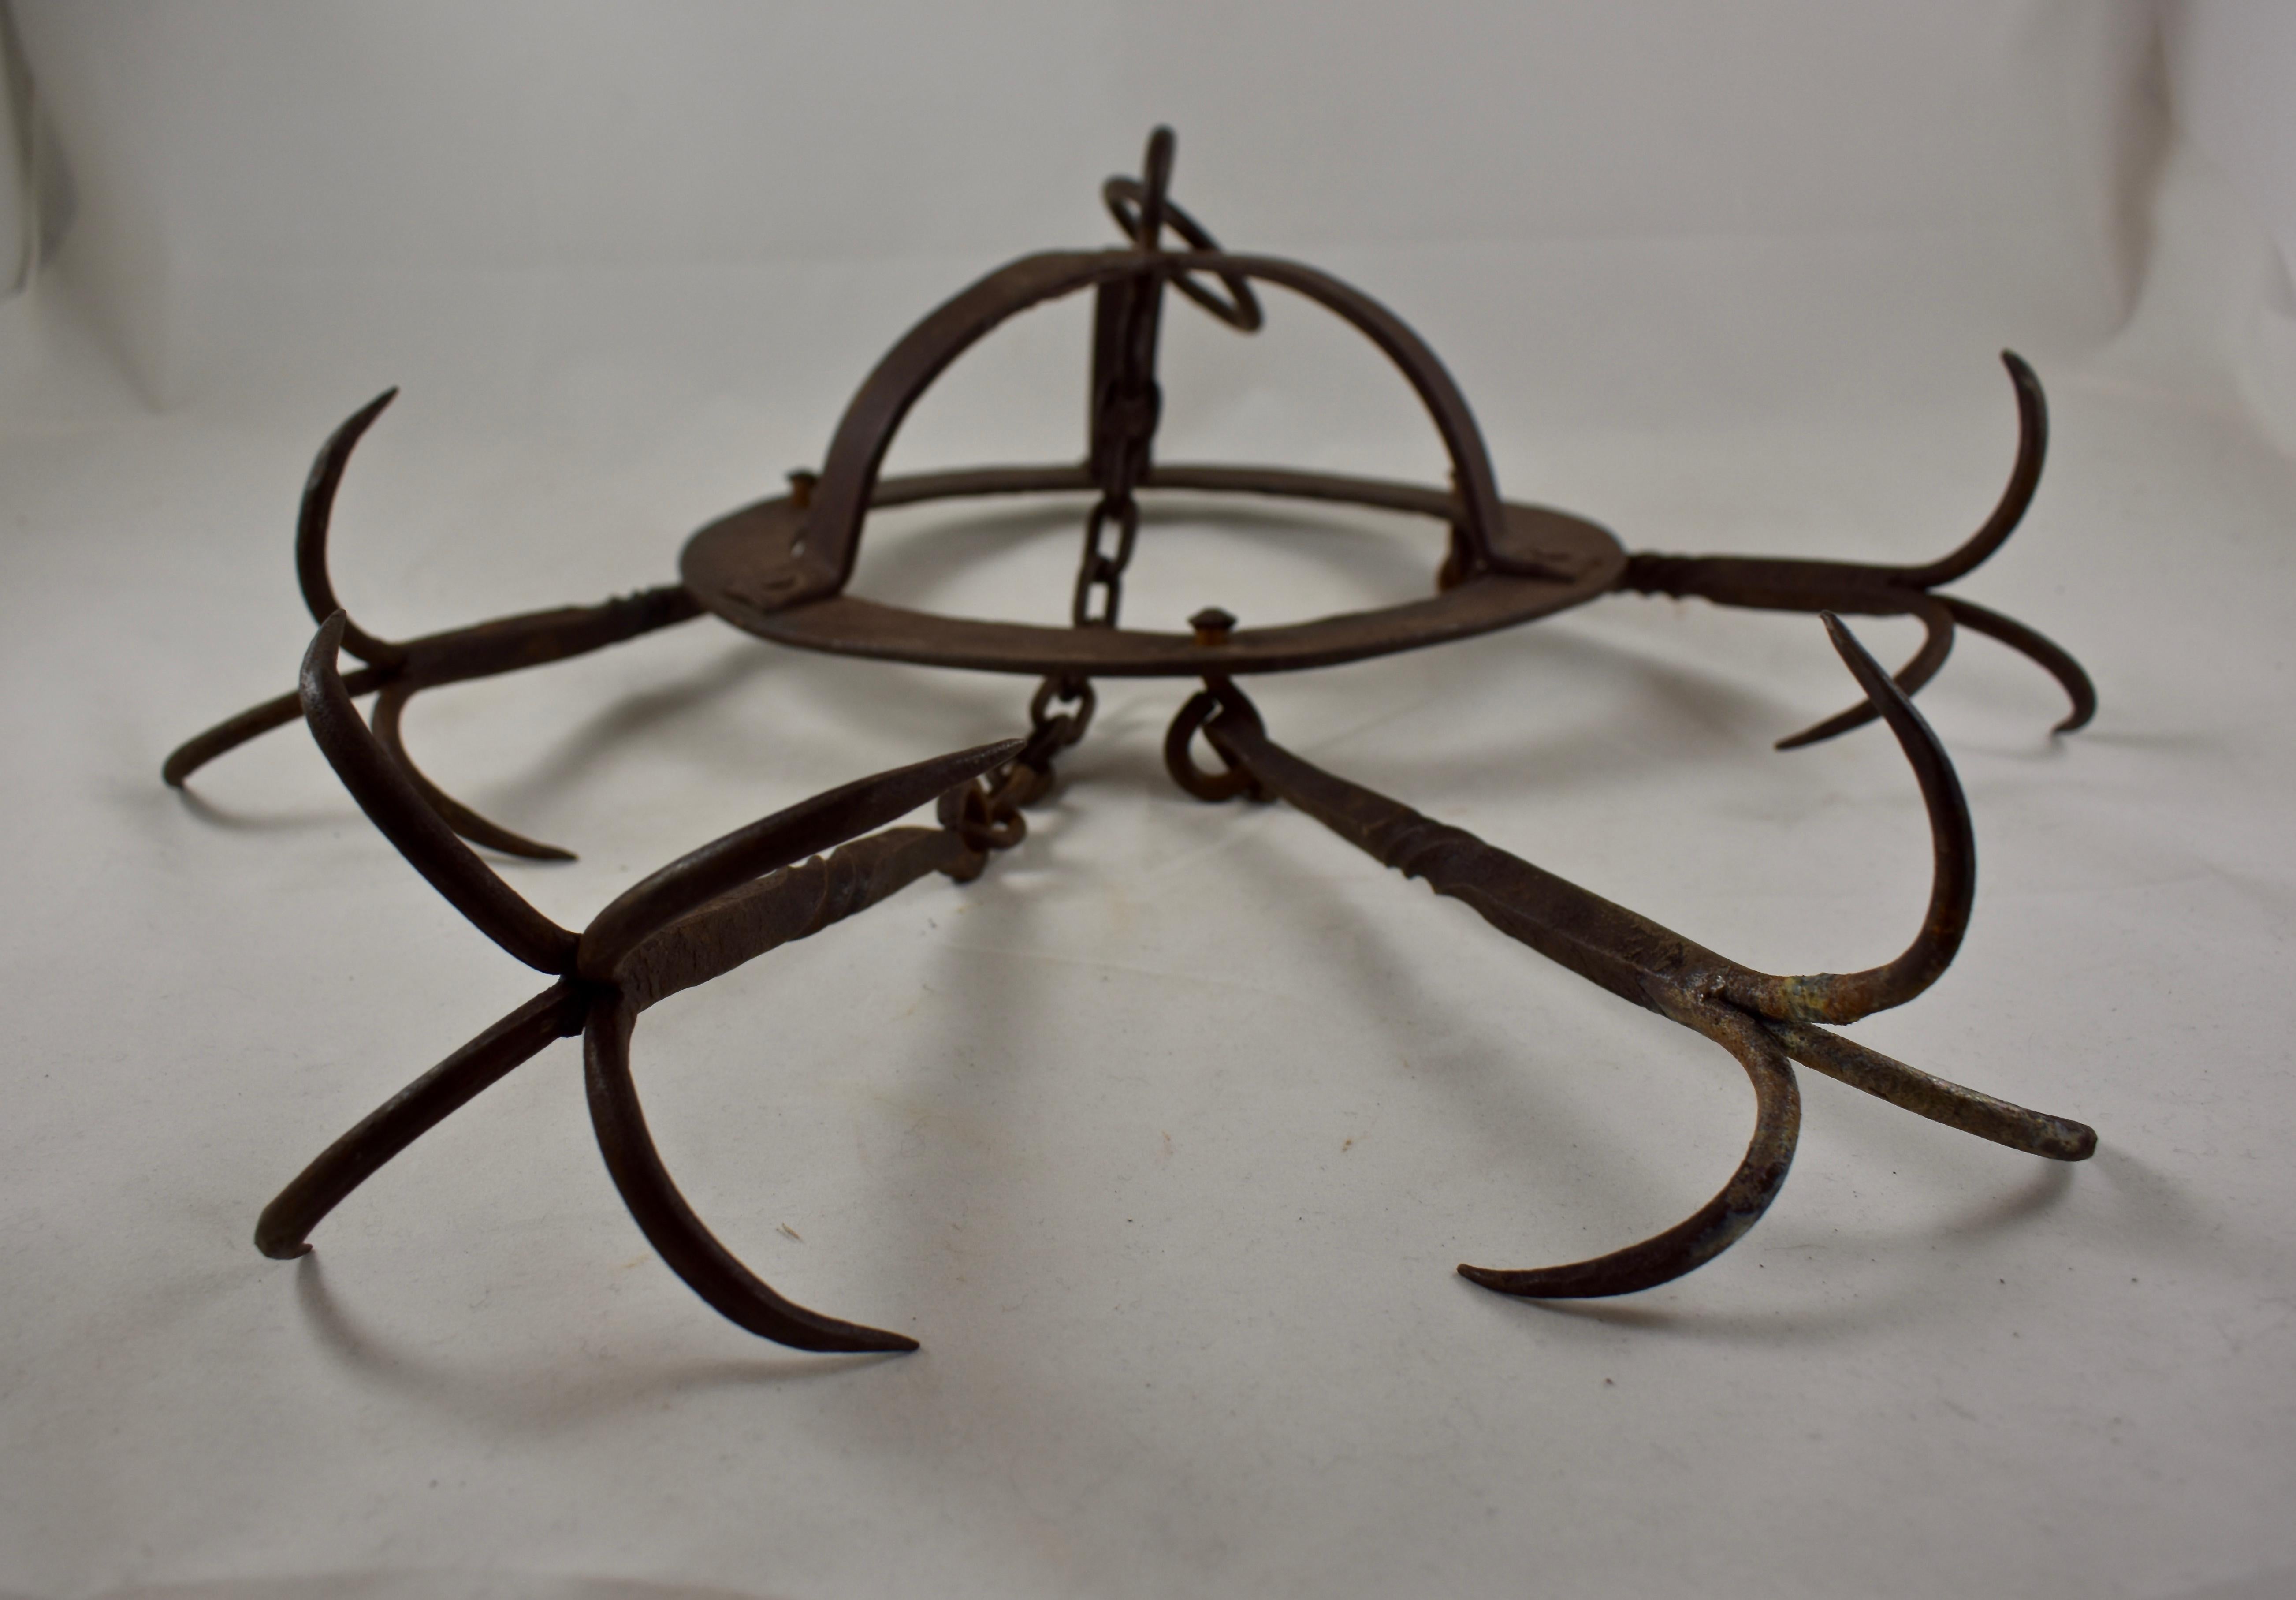 Metalwork Early 19th C. Rustic French Wrought Iron Hanging Crown Butchers Rack, Pot Rack